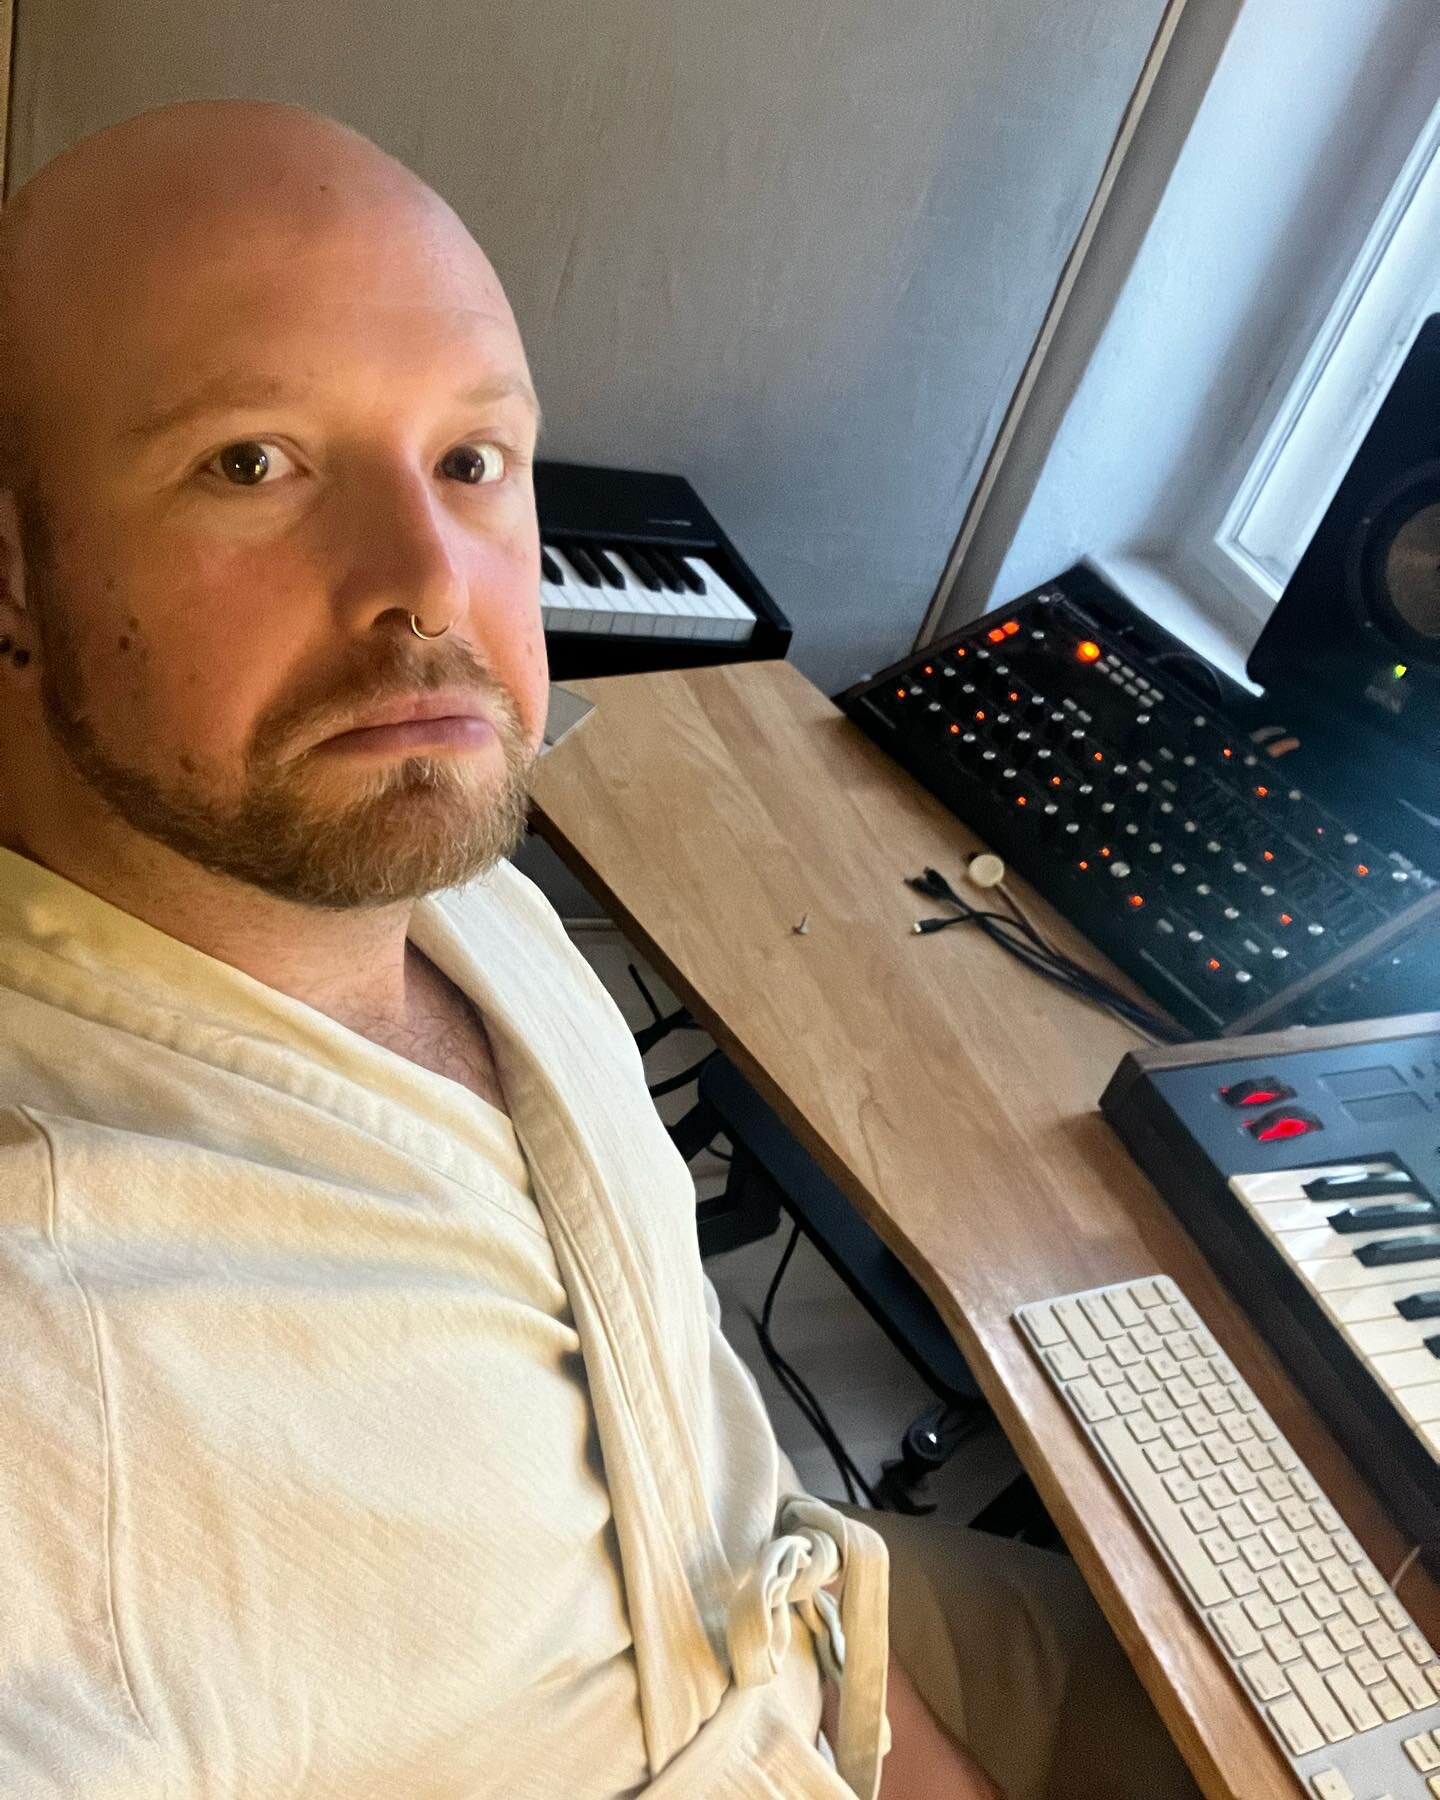 After a brief trip back to Aotearoa to do very needy technical engineering things, I&rsquo;m back in Berlin and working on shows and new material for 2024.

Finishing setting up a new studio space in the delightful Bergmannkiez, Kreuzberg.

#studio #